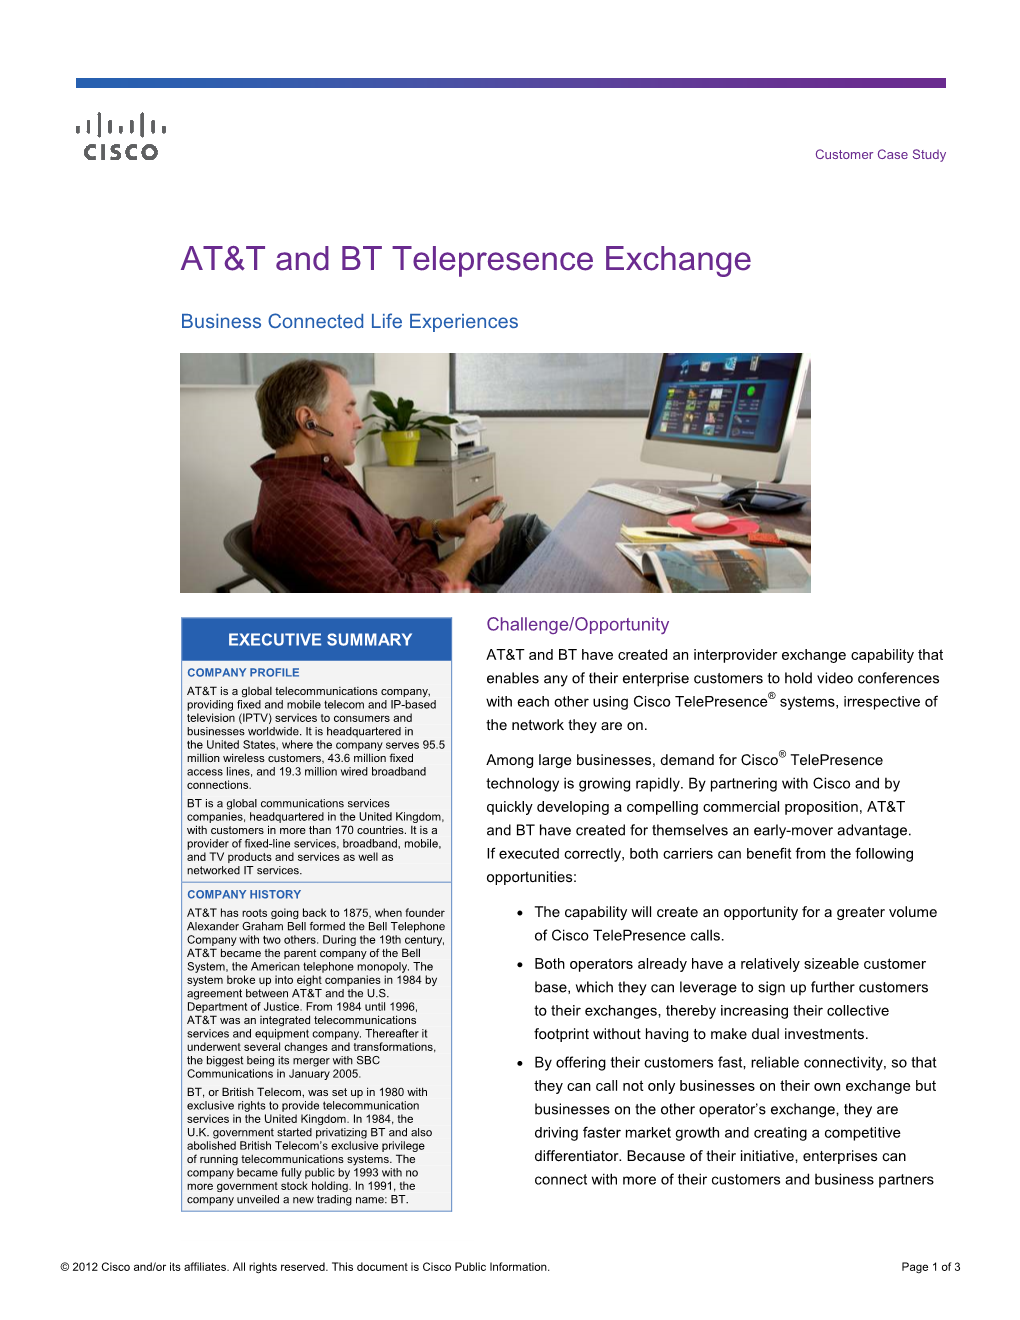 AT&T and BT Telepresence Exchange